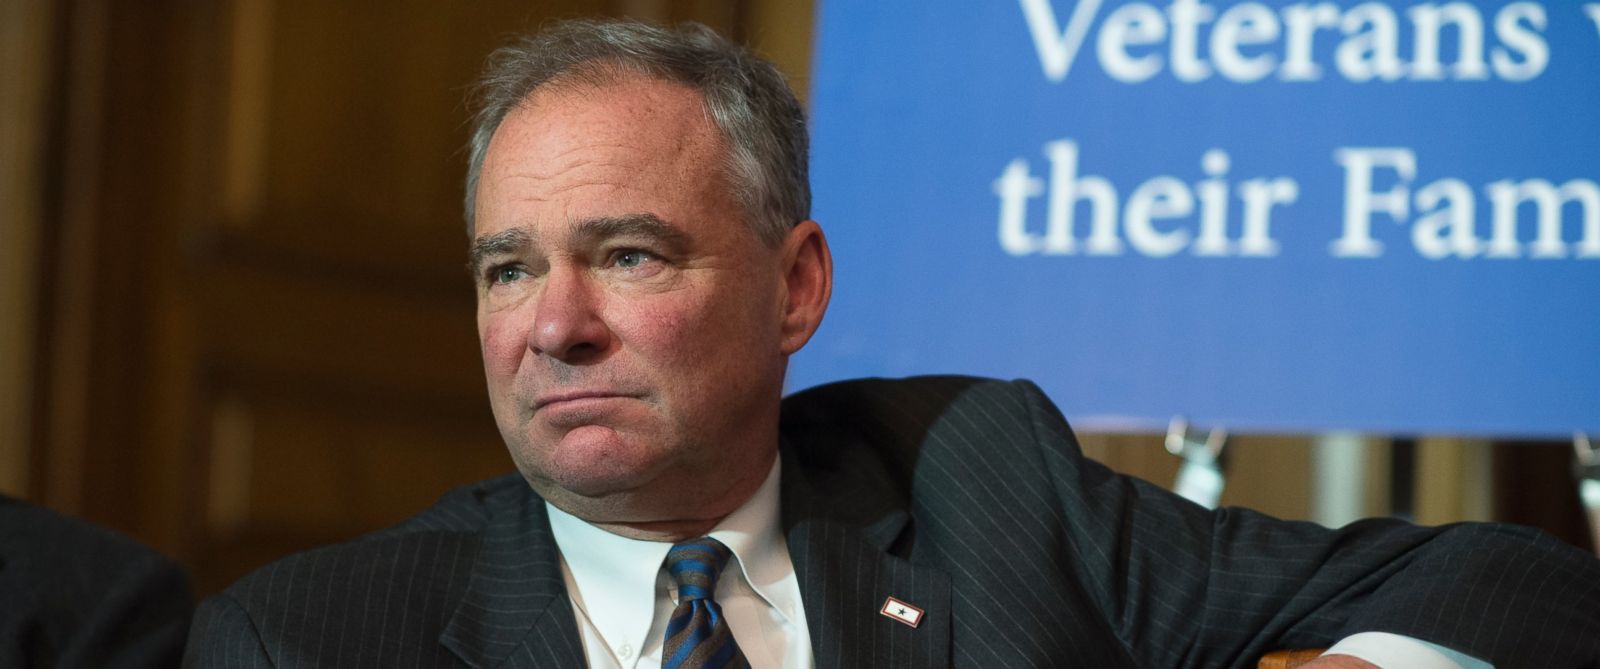 Hillary Clinton chooses Tim Kaine as her running mate